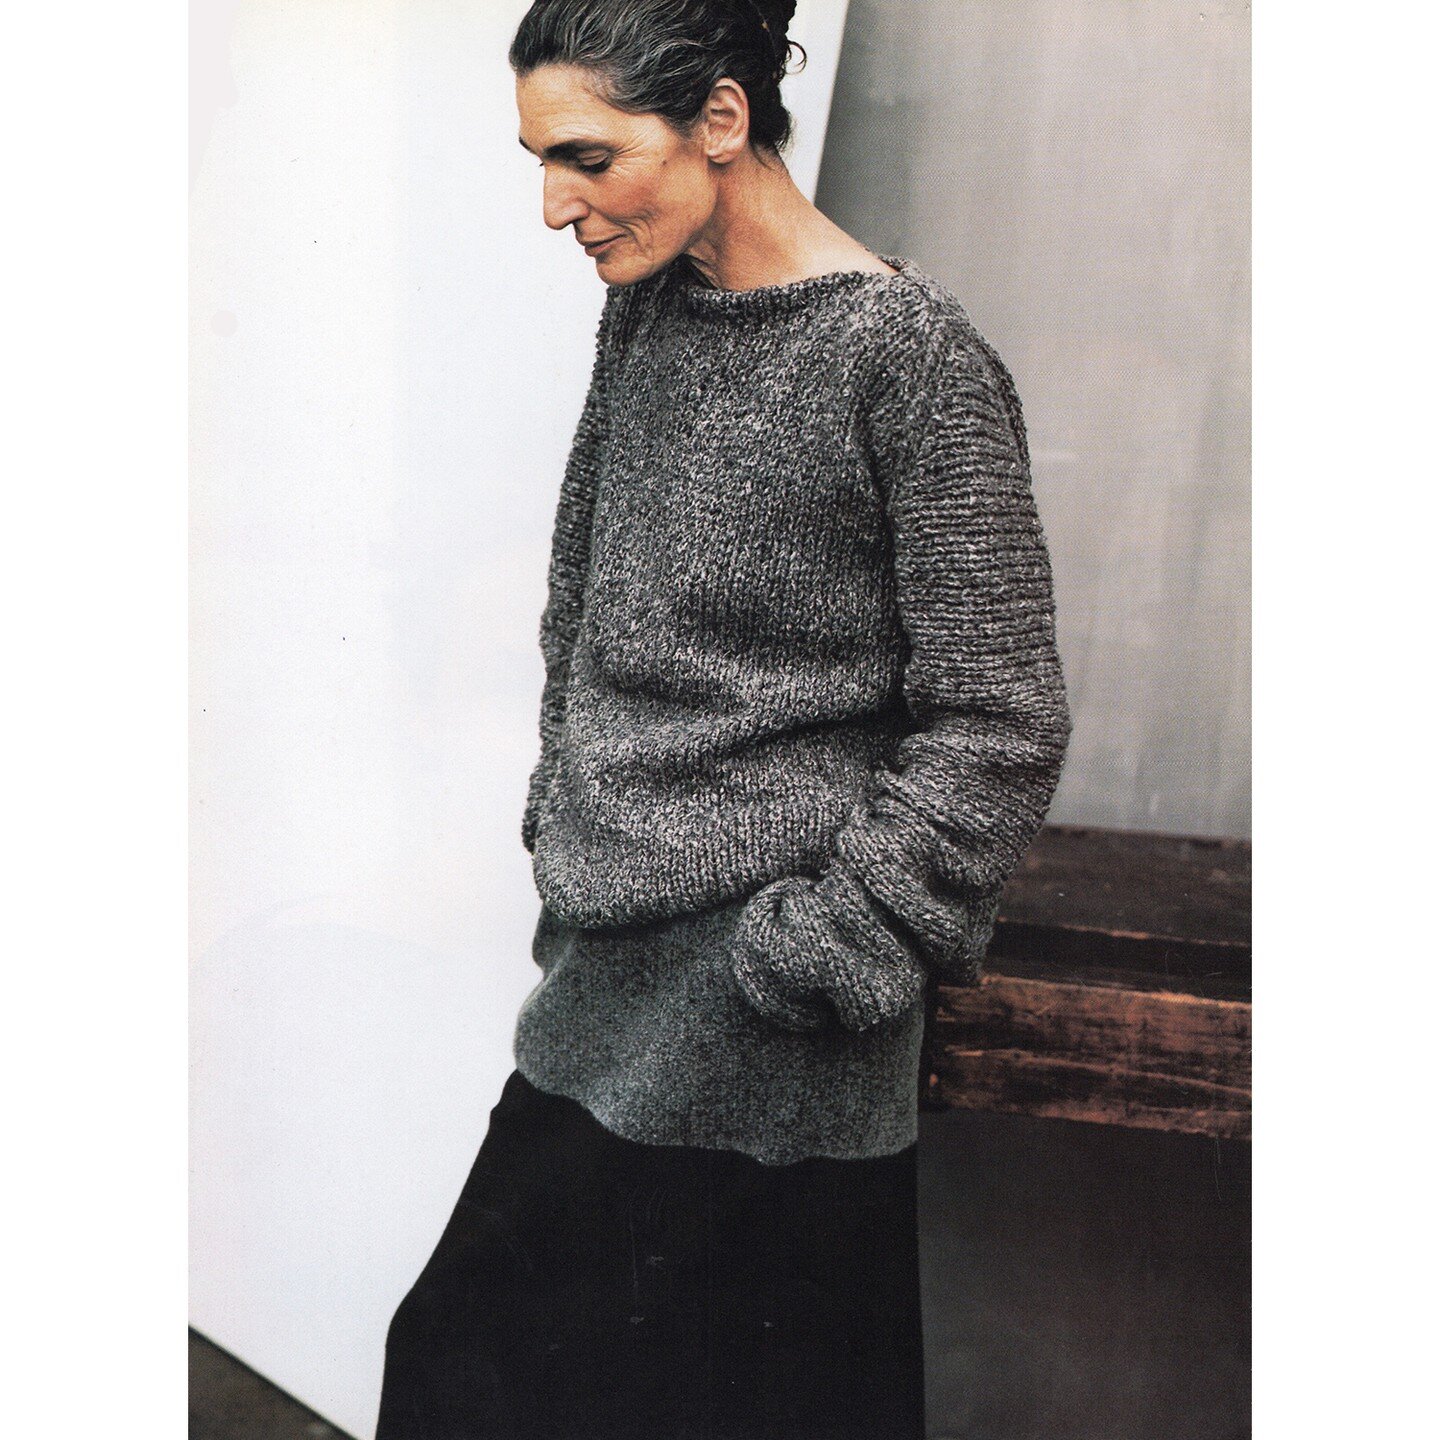 #CASHMERE #donnakarannewyork
#ARCHIVE #90's #throwback ✨

...feeling quite emotional and nostalgic... 

CASHMERE TWEED CHUNKY KNIT

#donnakarancashmere
#systemofdressing
#peterlindbergh #peterlindberghphotography